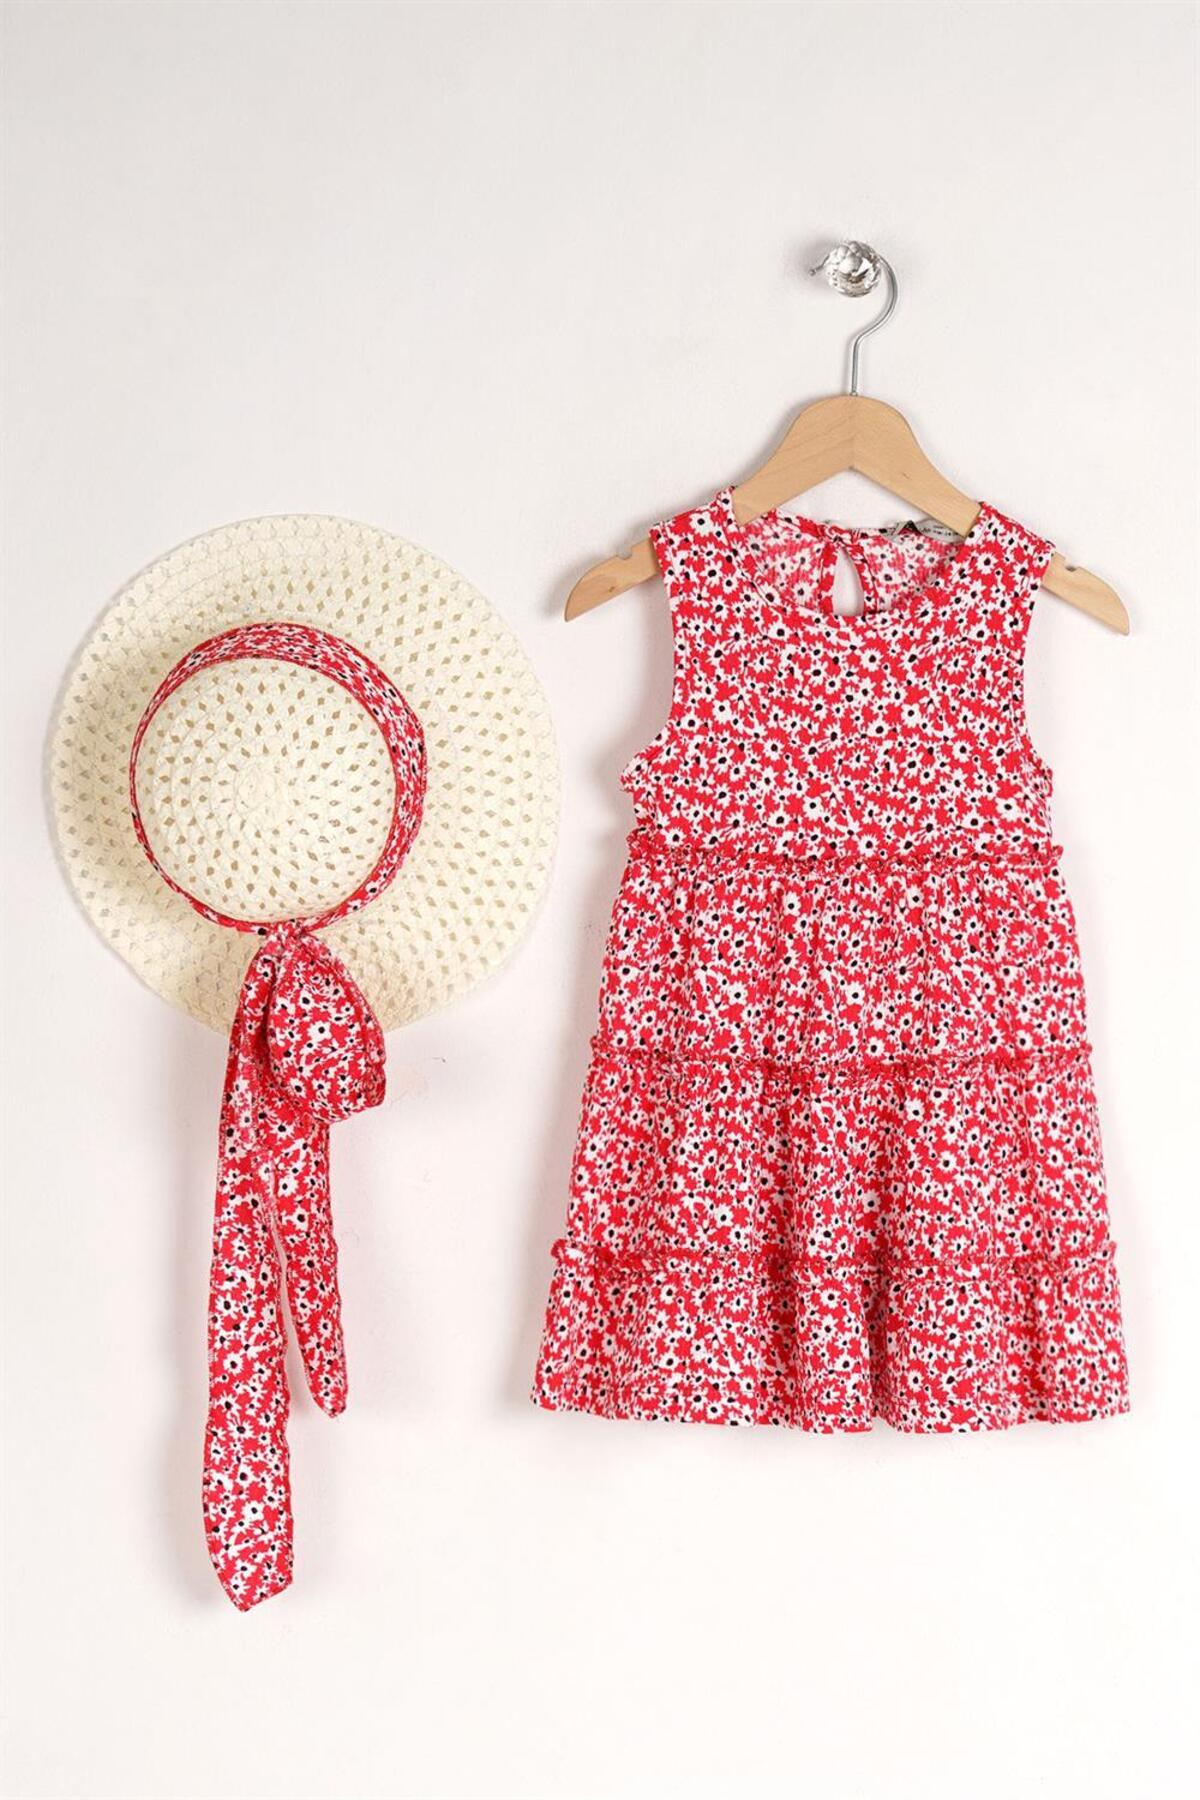 Girl Child Red Colored Floral Patterned Dress With Hat Accessory